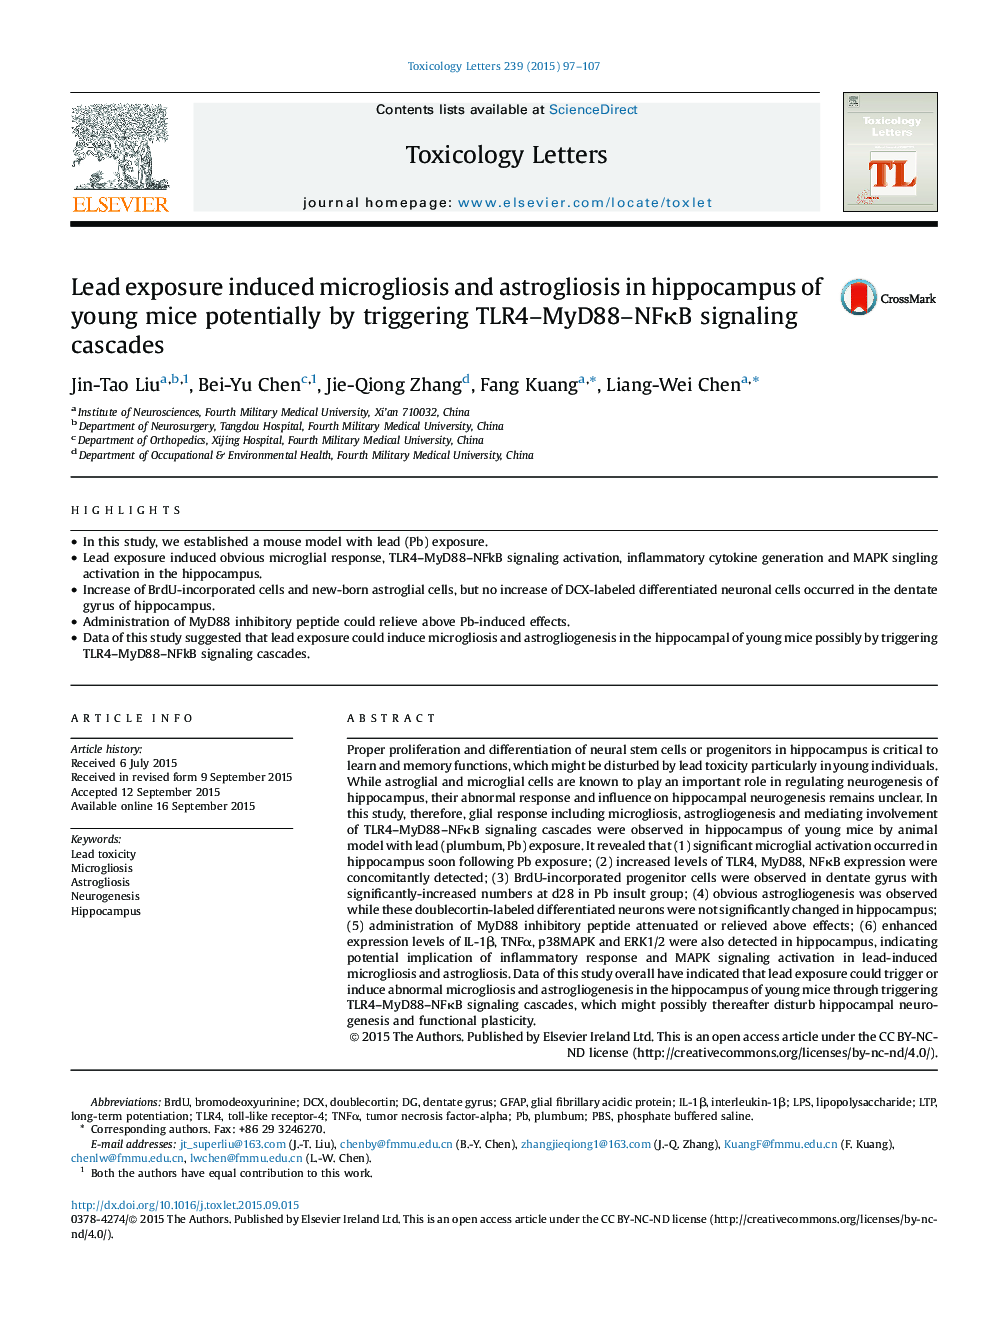 Lead exposure induced microgliosis and astrogliosis in hippocampus of young mice potentially by triggering TLR4-MyD88-NFÎºB signaling cascades